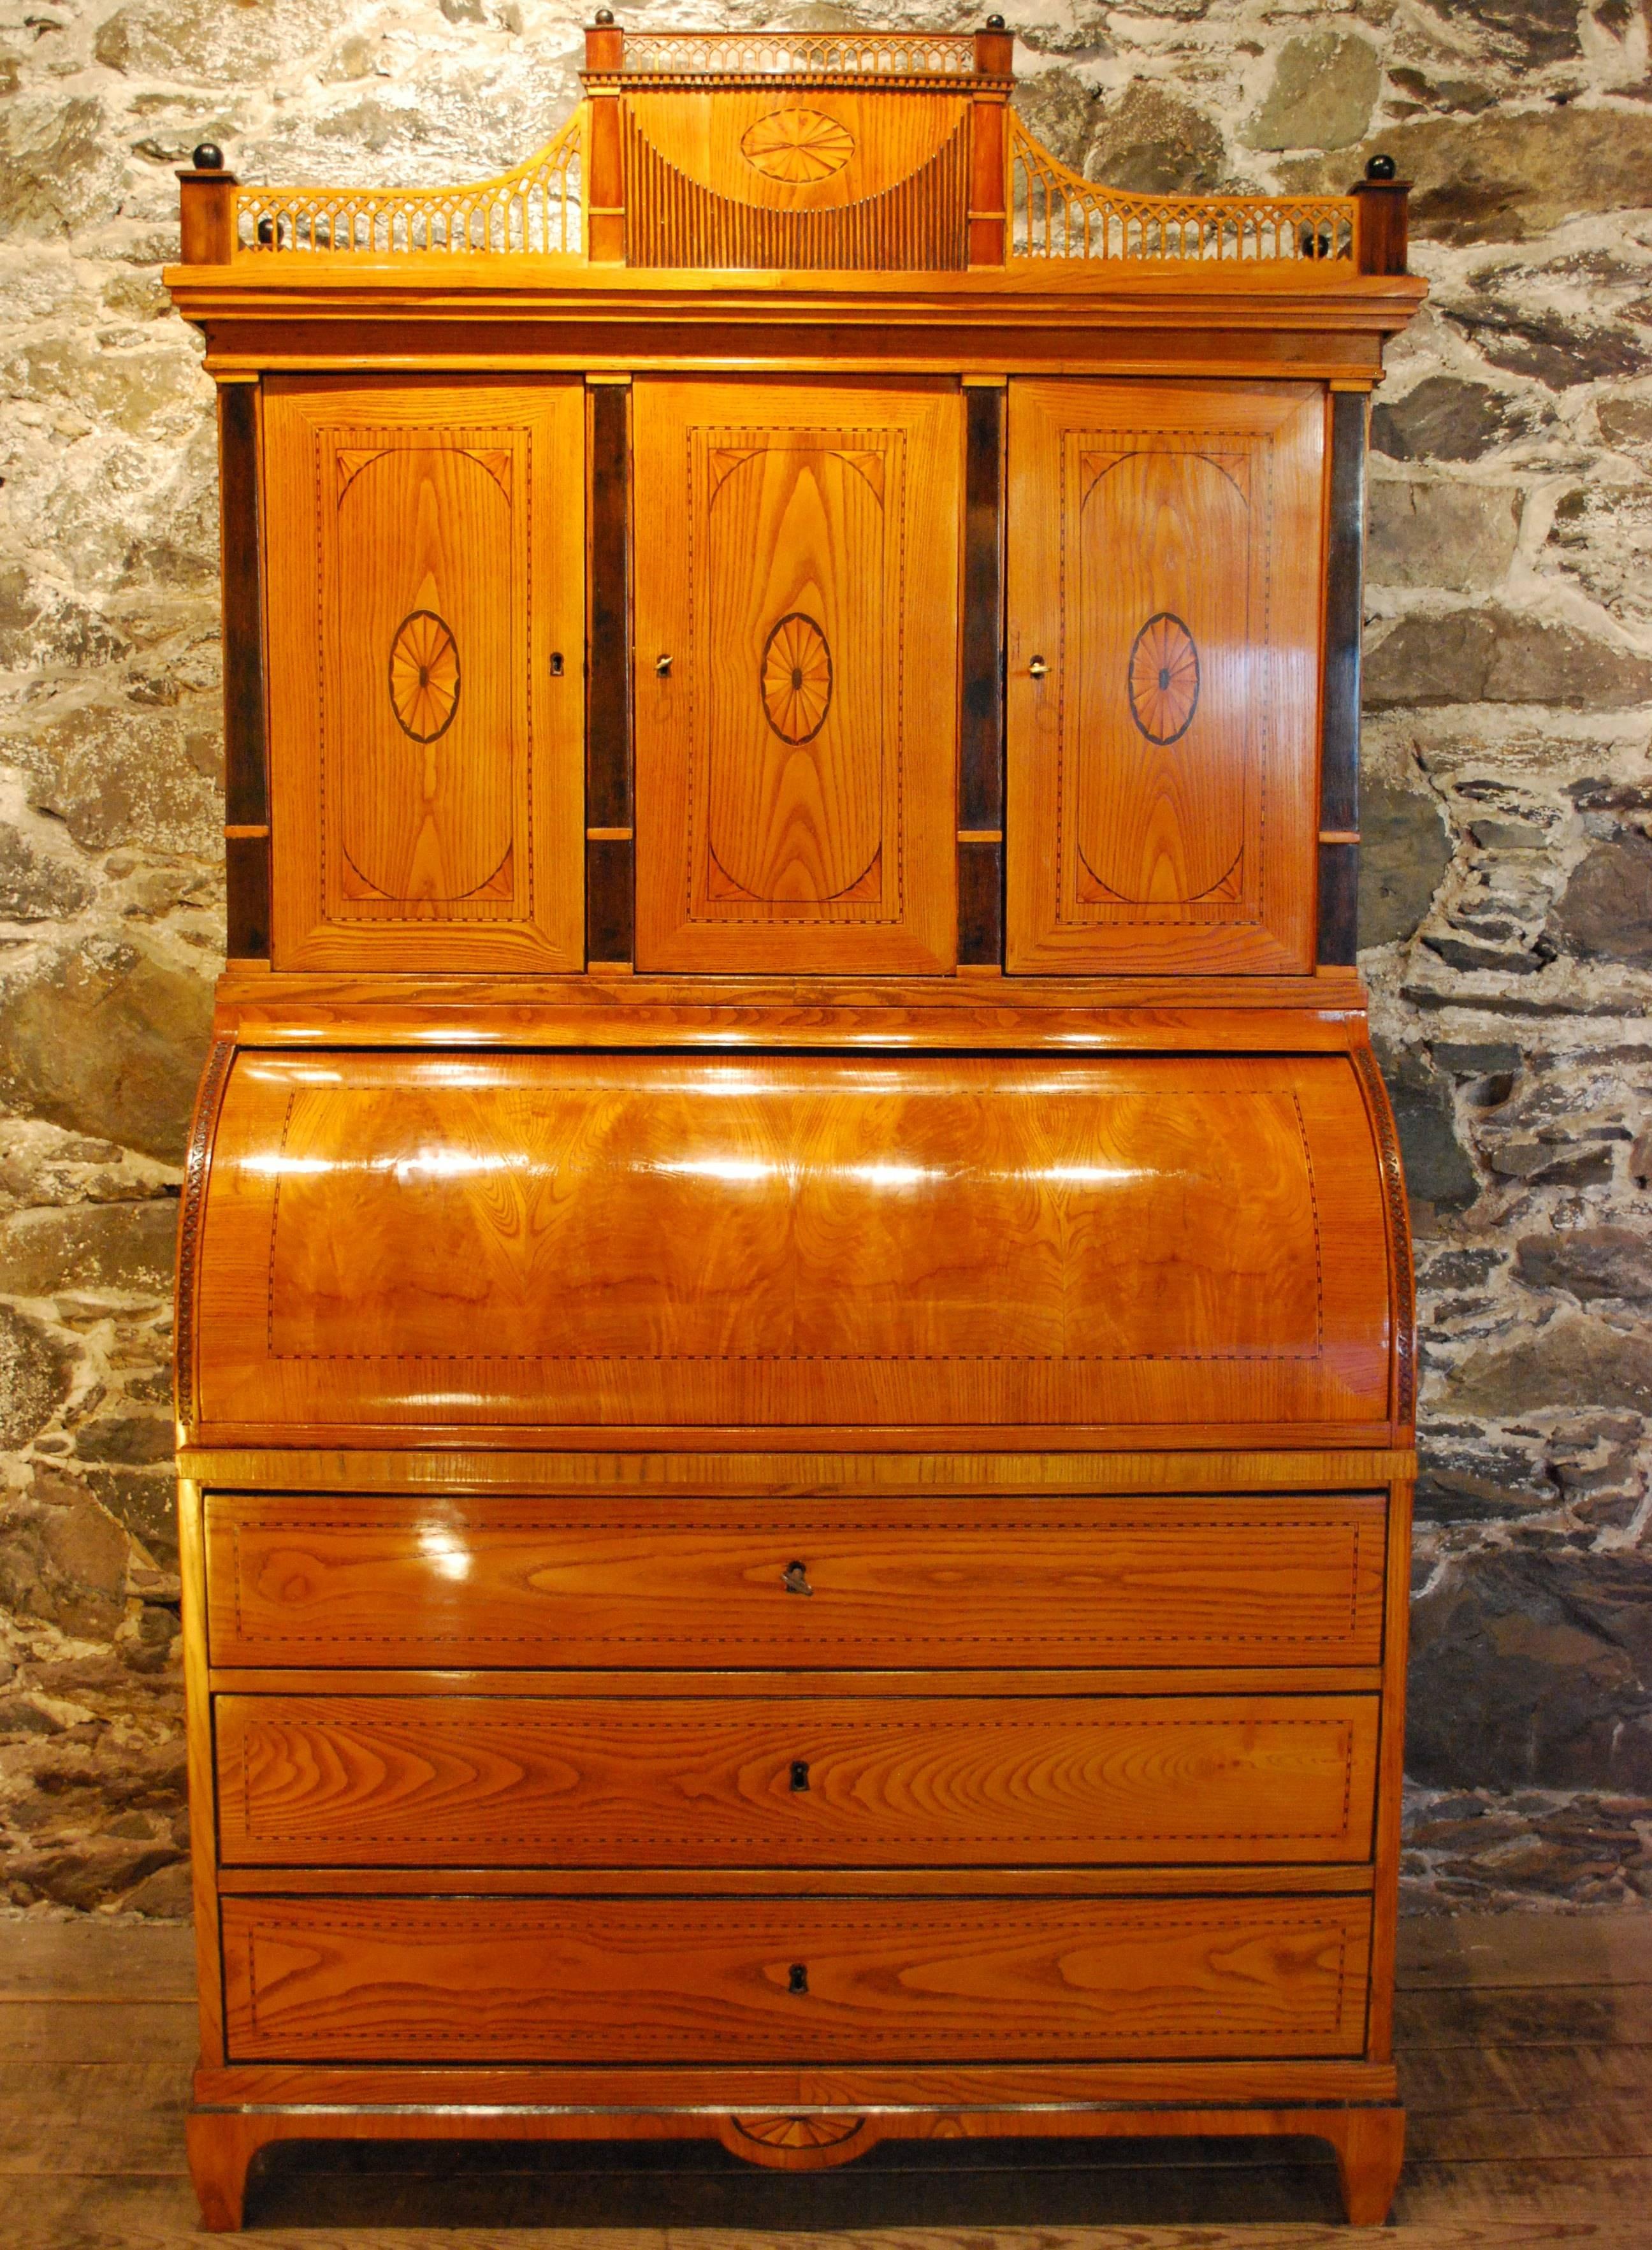 Antique Danish bureau cabinet with a cylinder top connected to its' retractable writing surface. The elm wood acts as a perfect backdrop for the marquetry, inlay and very unusual family profiles all done in a variety of exotic woods.